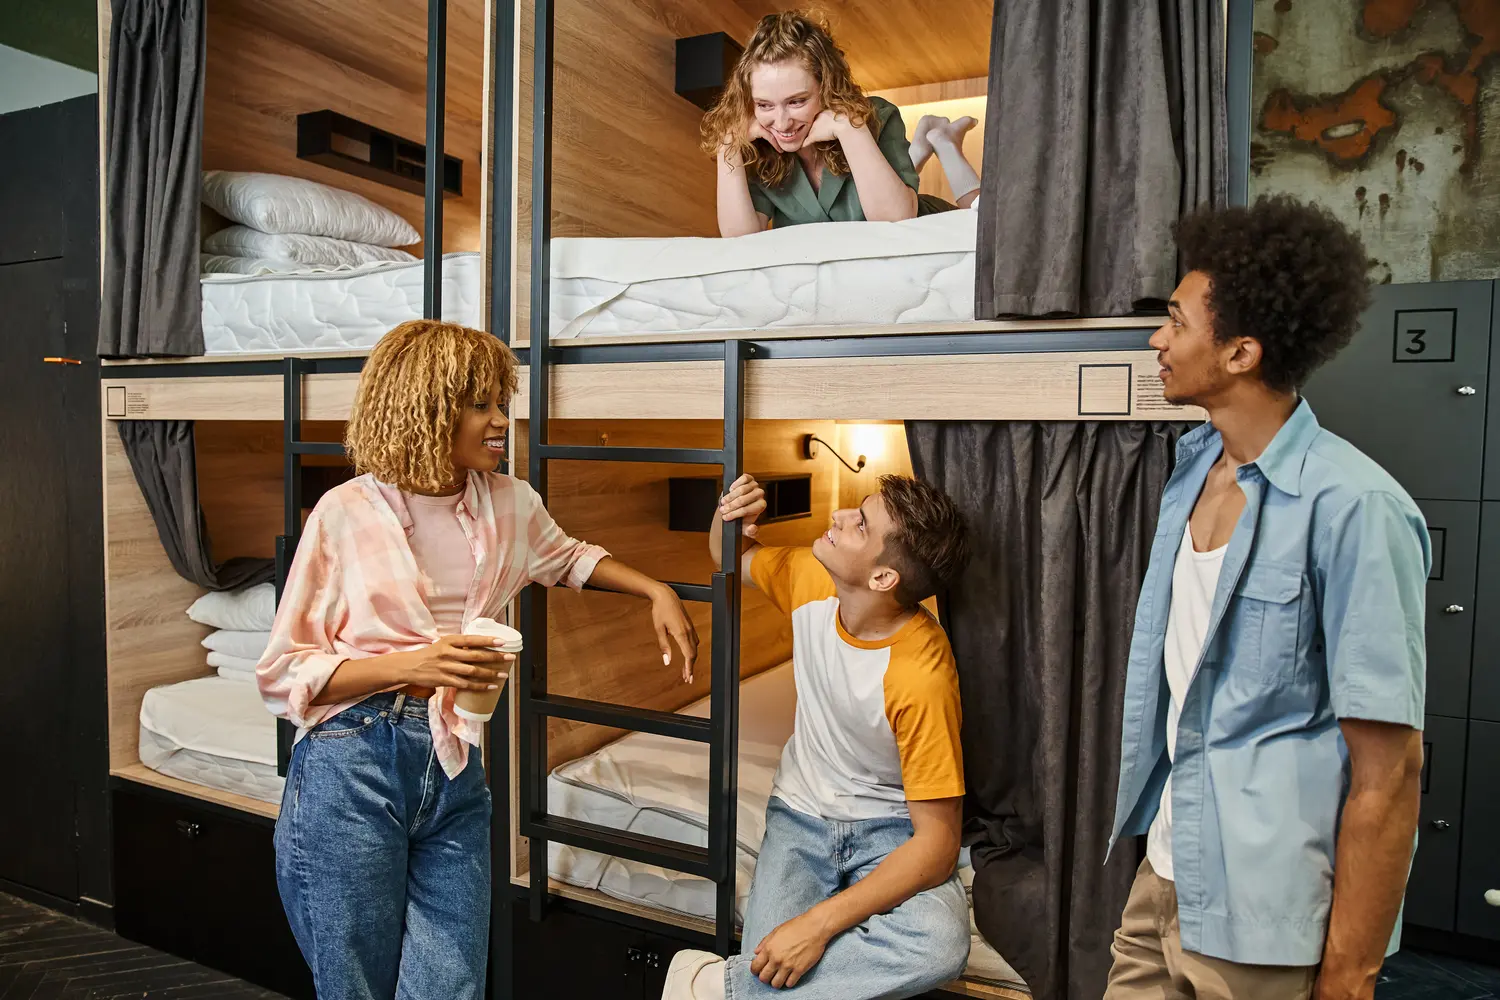 Travelers in the dorm room at a hostel socializing